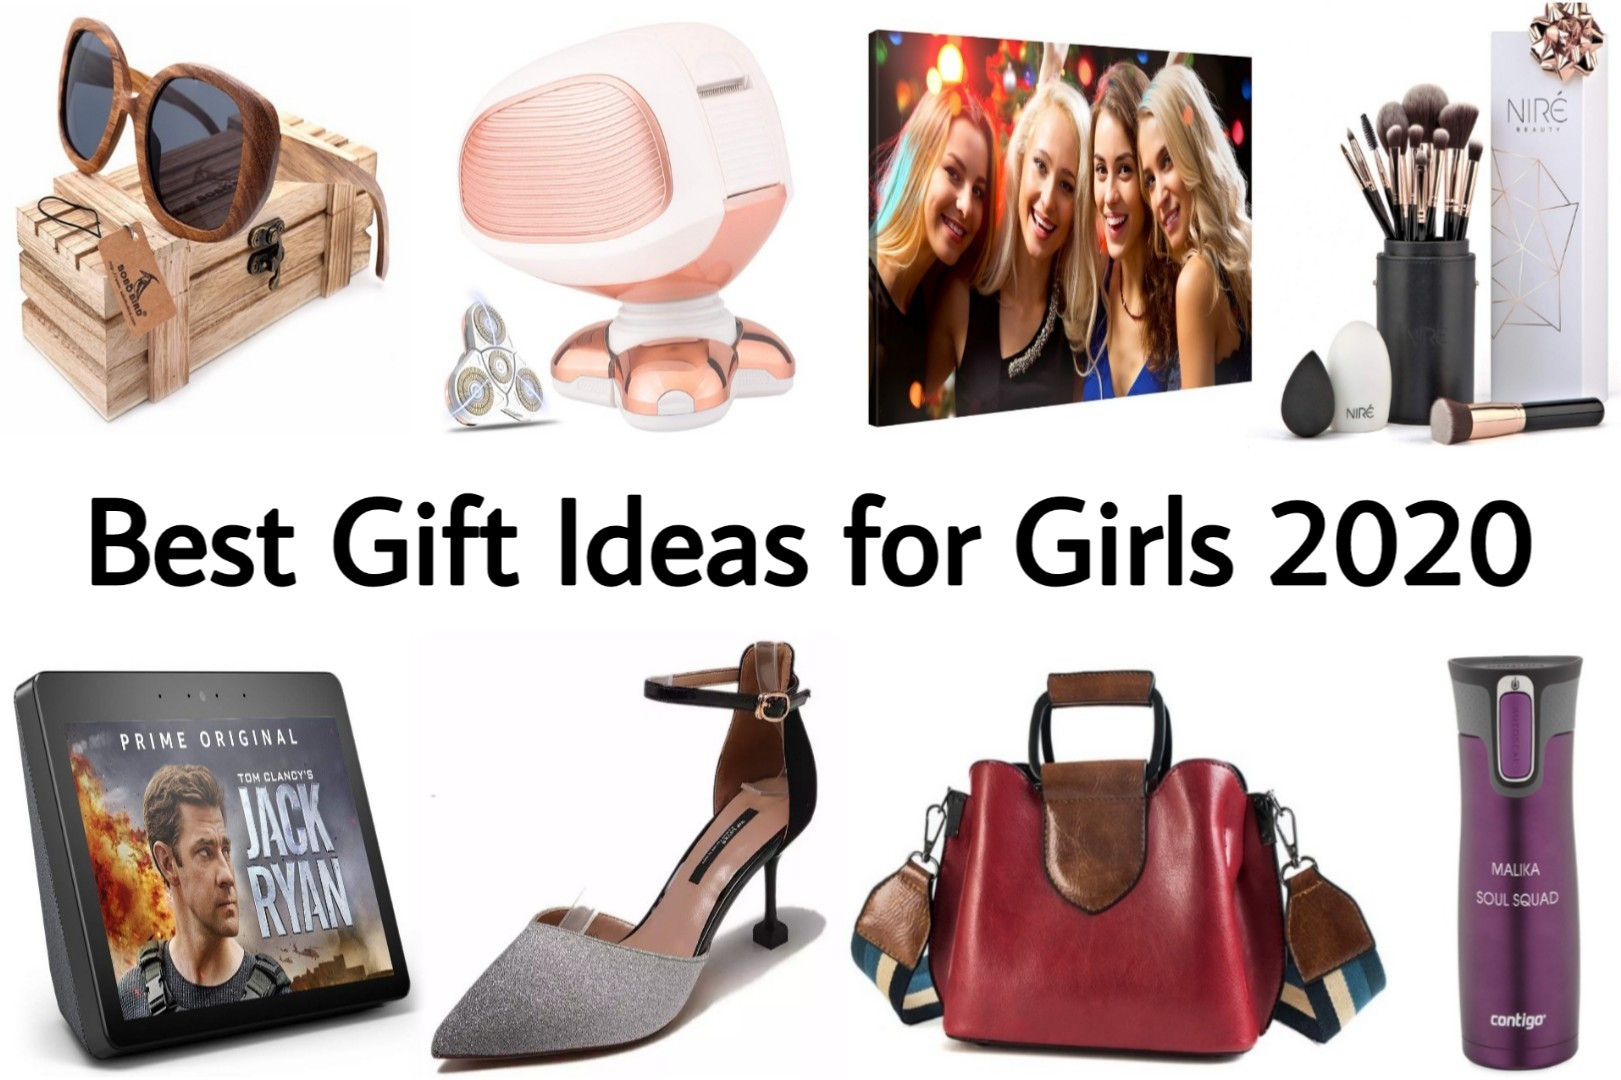 Best Gift Ideas For Girls
 Best Christmas Gifts For Girlfriend 2020